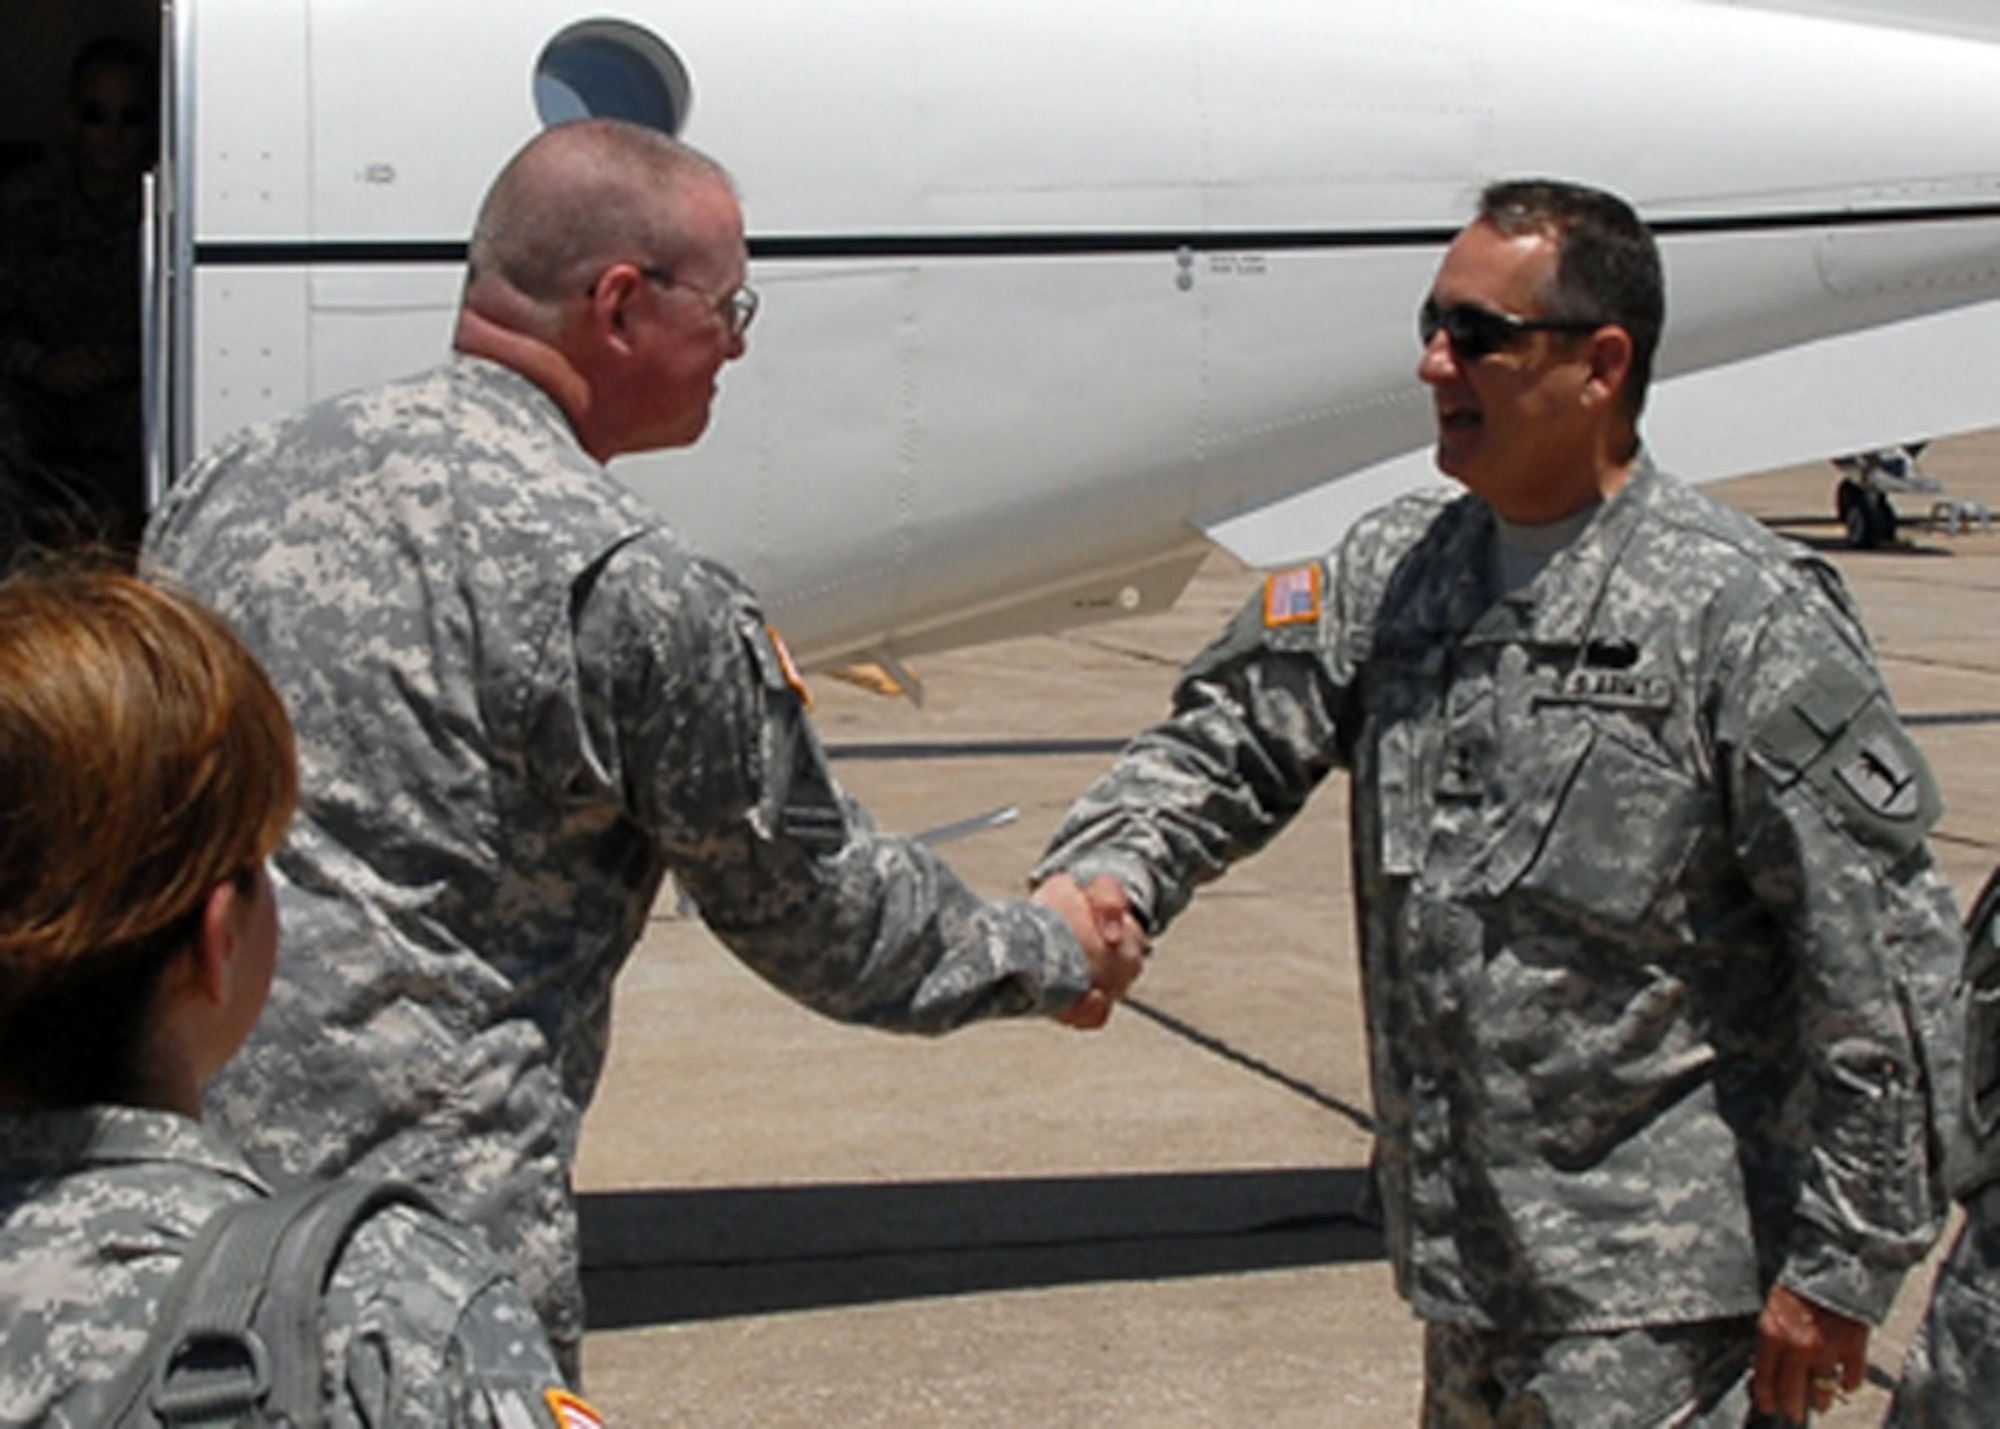 Maj. Gen. Stephen L. Danner, Adjutant General for the State of Missouri, arrives in Joplin, MO, to visit with COL William North, Task Force Phoenix Commander, and other leaders involved in local disaster recovery efforts after the May 22nd tornado which devastated the city.  (Photo by Technical Sgt. Robert Ayres)